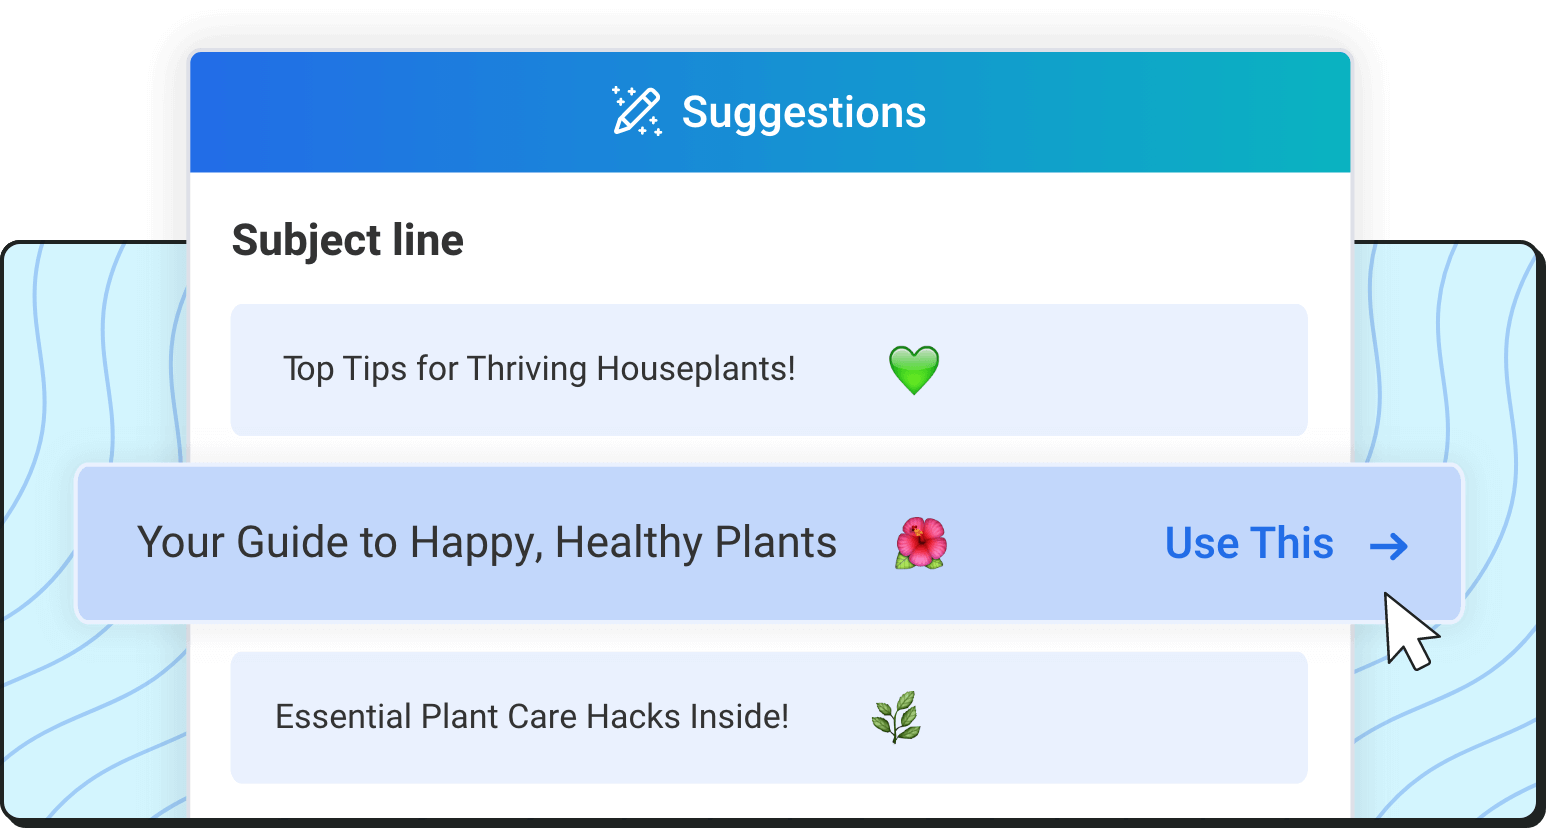 Image of AI suggested subject lines with "Your Guide to Happy, Healthy Plants" chosen